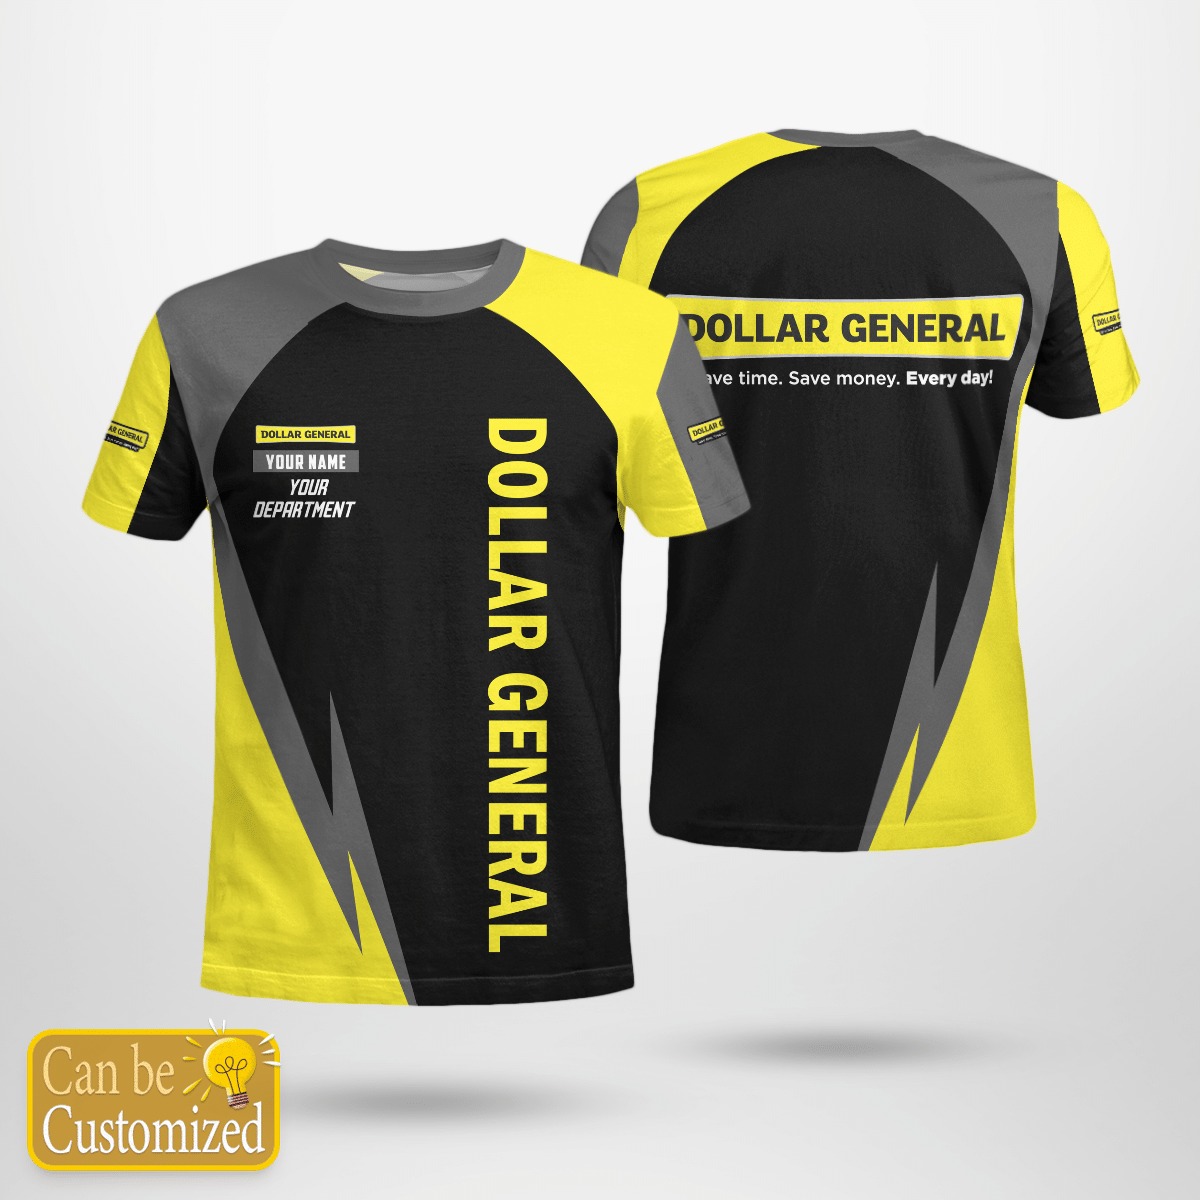 Dollar General your department custom personalized name 3d shirt, hoodie 5 - Copy